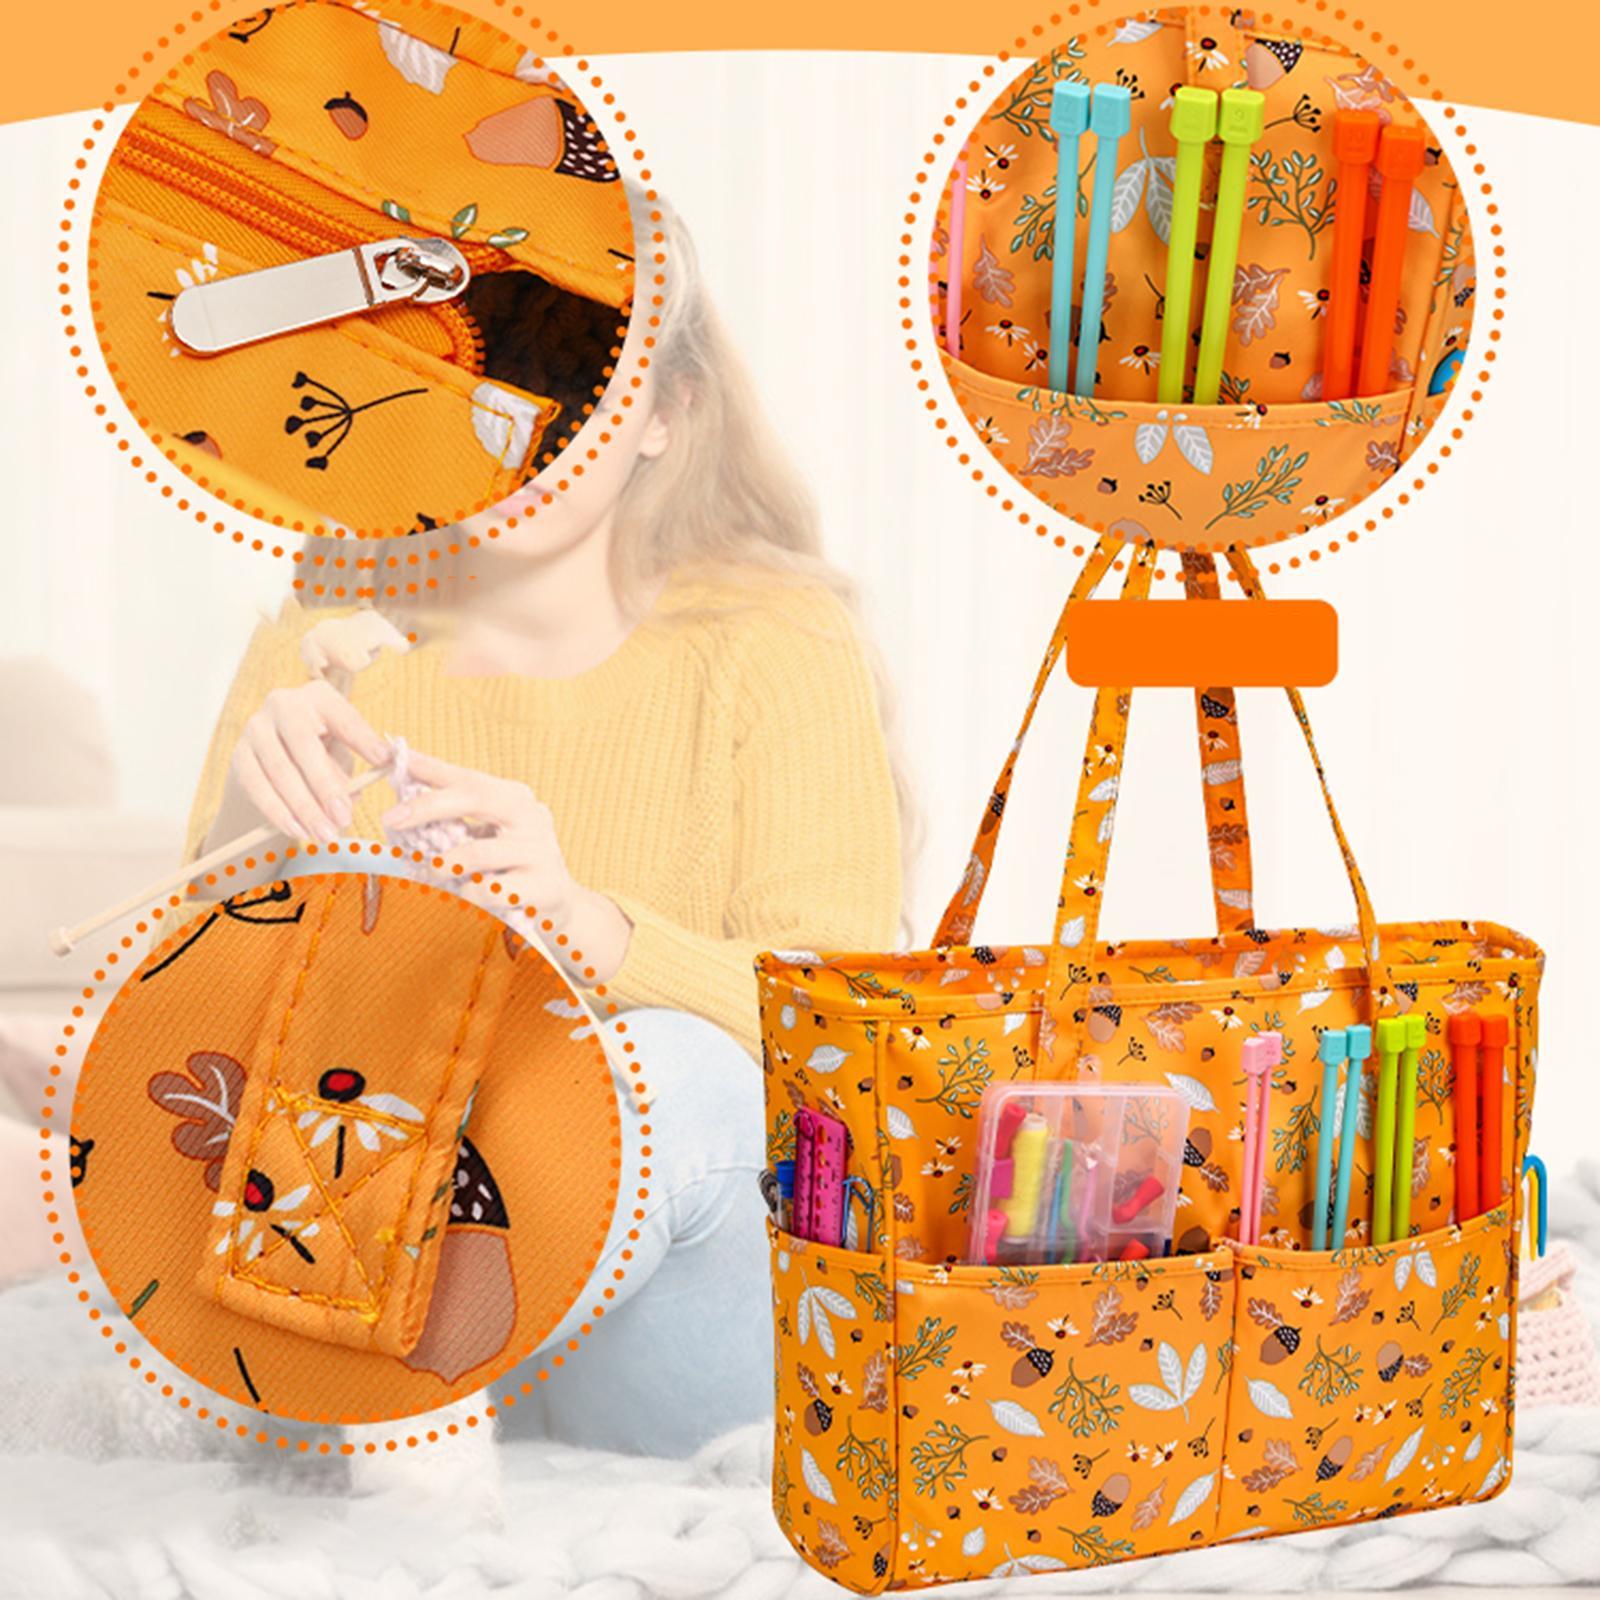 Yarn Storage Bag Portable Practical Multi Pockets Oxford Cloth Multiuse Knitting Bag Large Capacity for Household Travel Embroidery Supplies